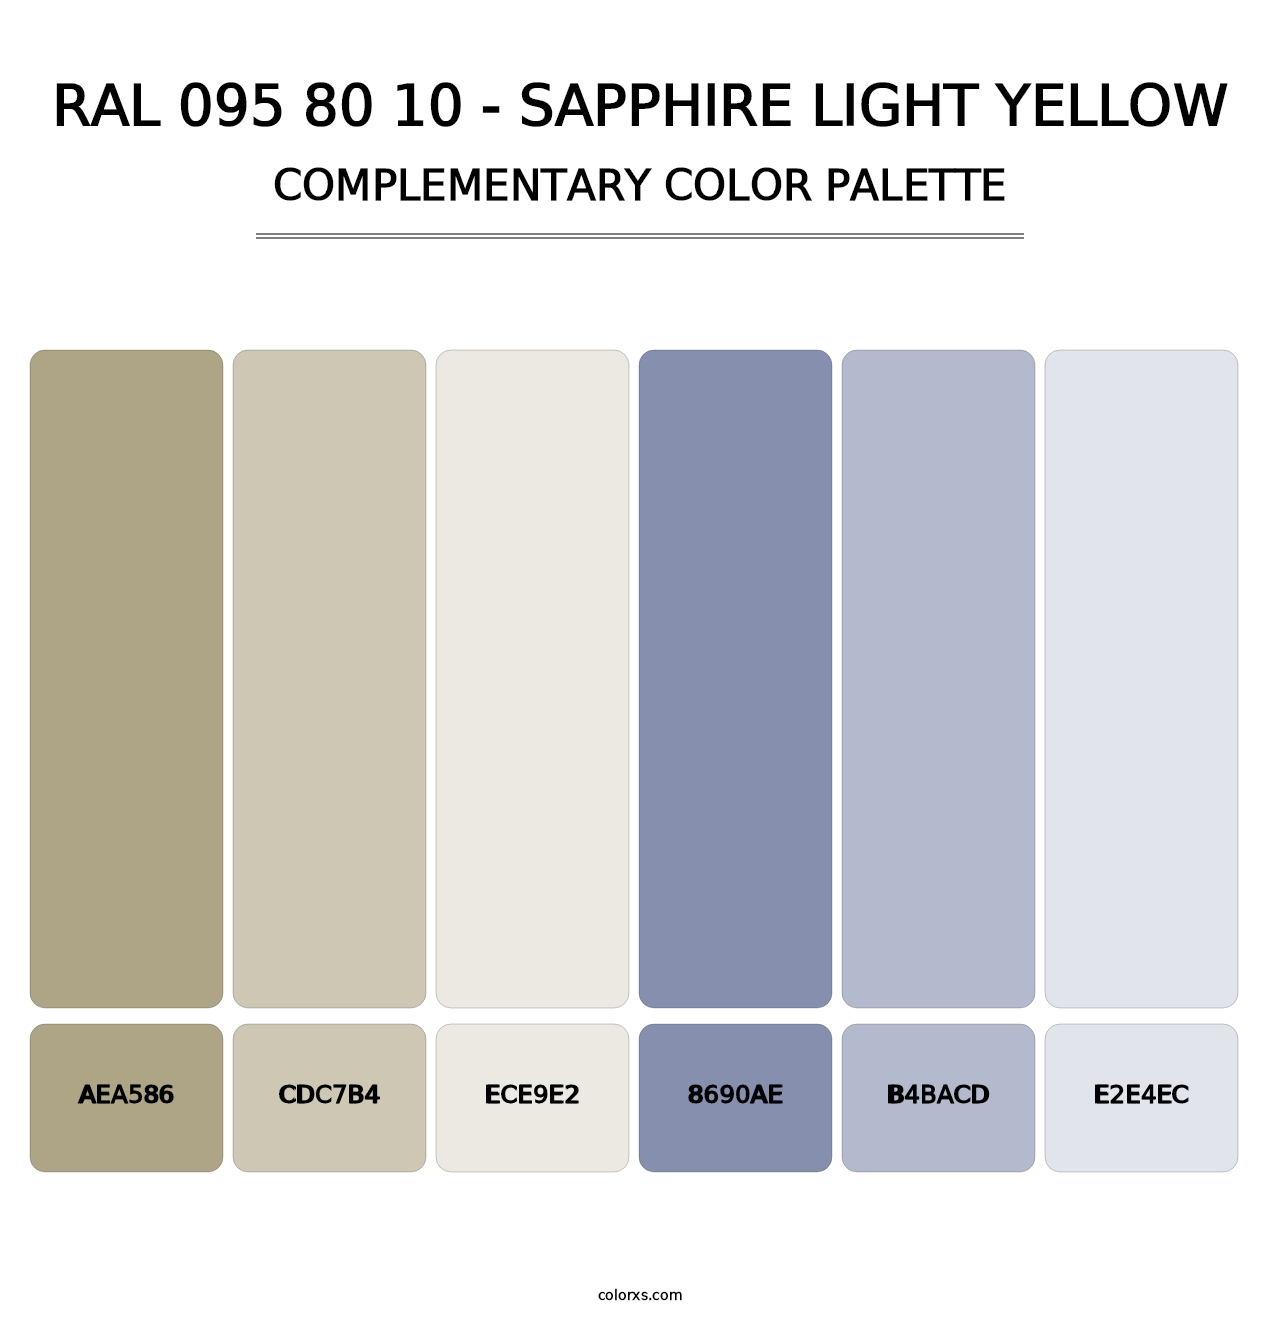 RAL 095 80 10 - Sapphire Light Yellow - Complementary Color Palette